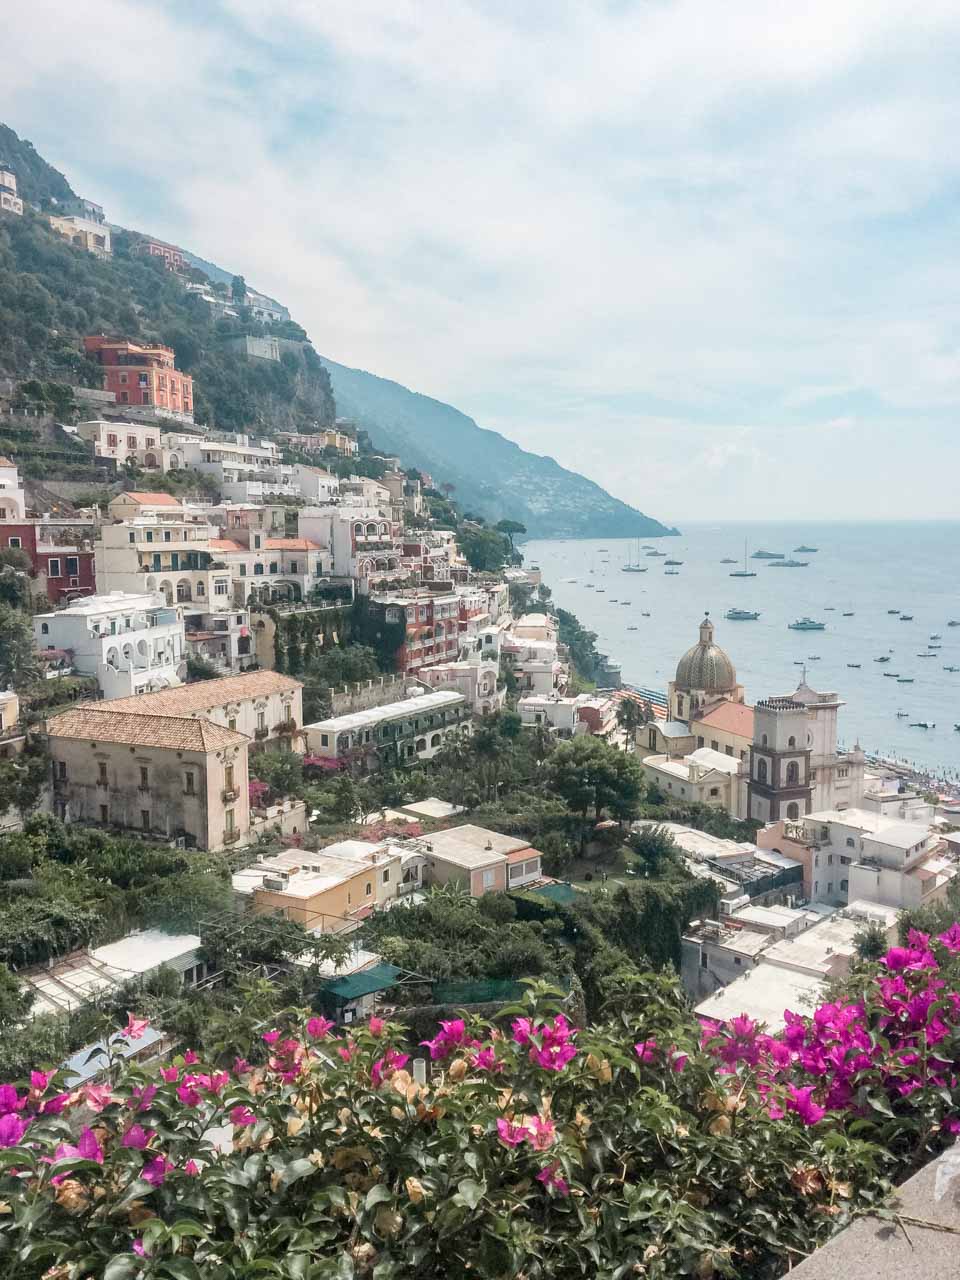 Boats on the sea and hillside houses in Positano, Italy seen from above